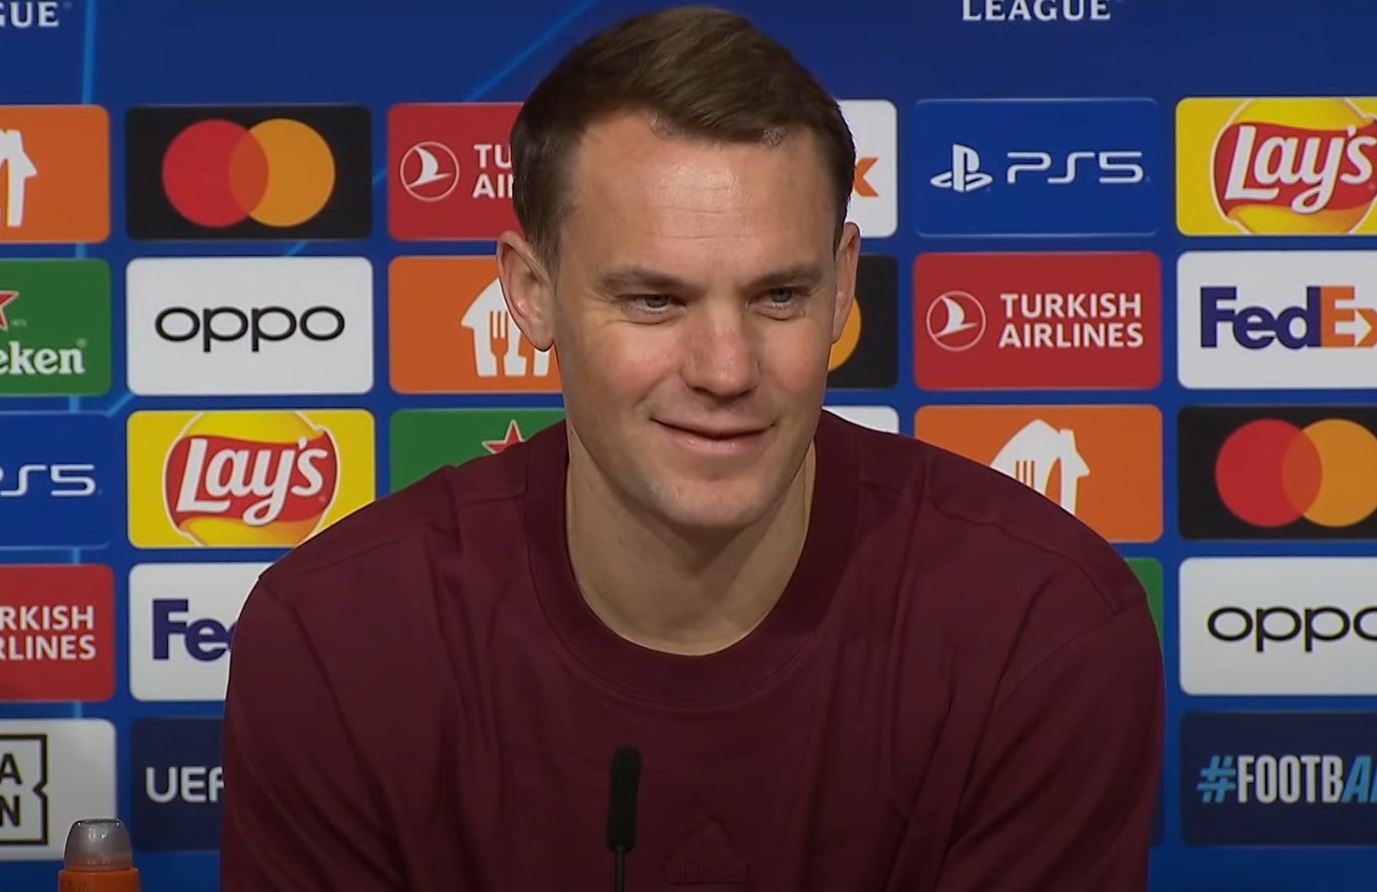 Neuer aims to return to German national team in March